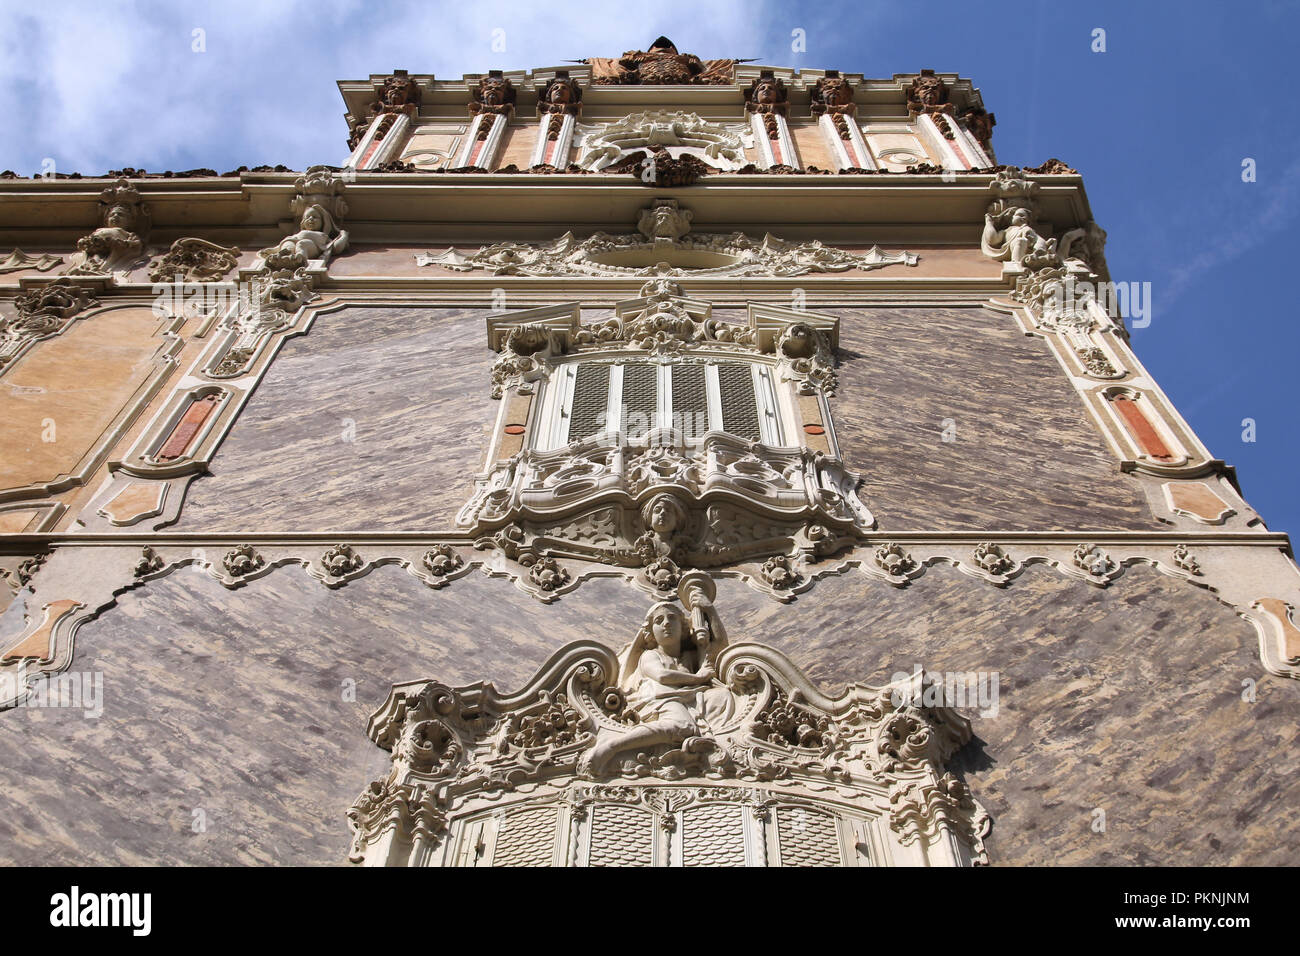 Valencia, Spain. Old architecture - famous National Museum of Ceramics. Stock Photo